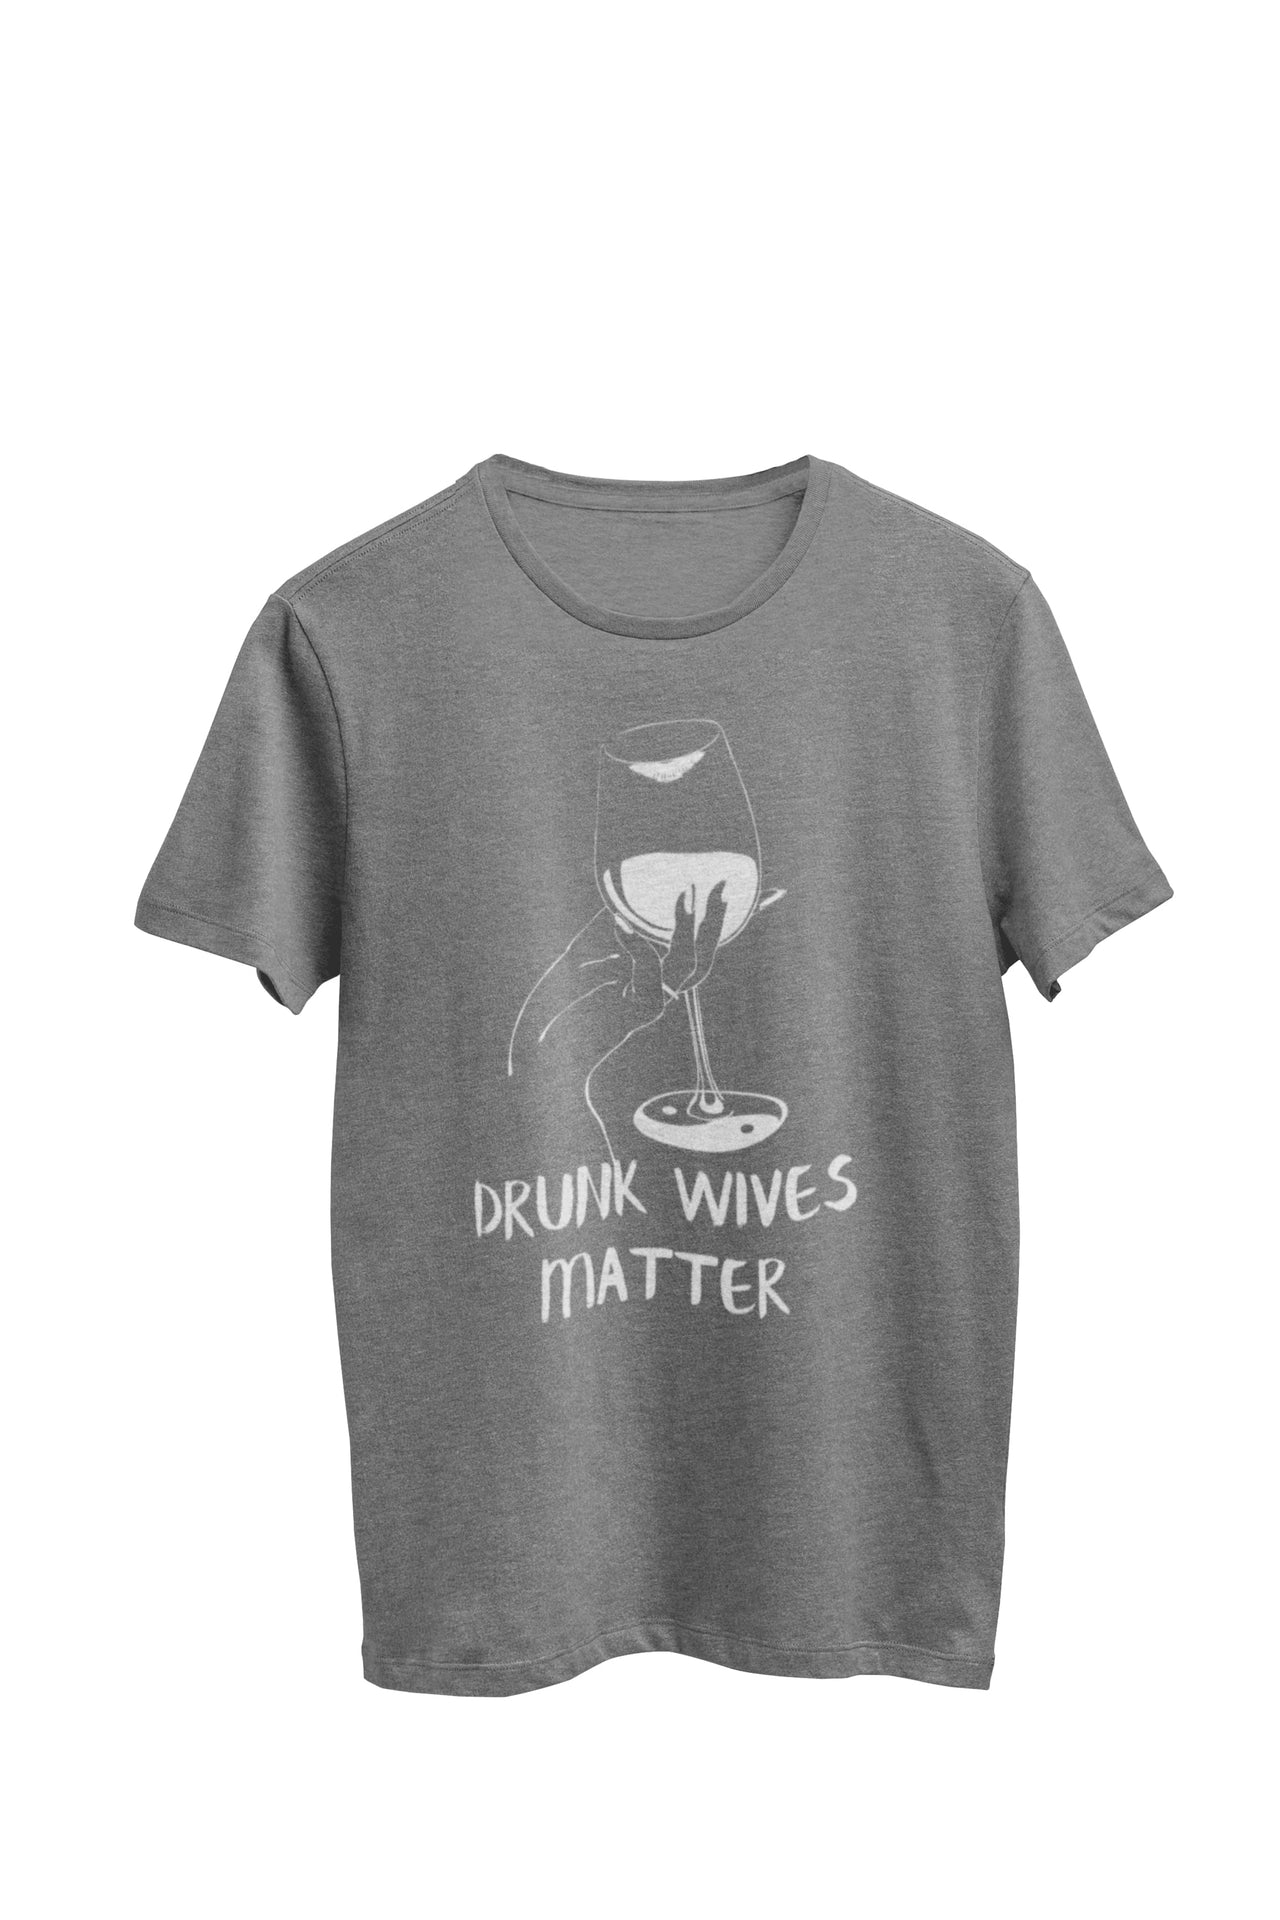 Gray Heather Unisex Tee with the text 'Drunk Wives Matter.' The design features an image of a woman's hand holding a half-filled wine glass with lipstick marks. Created by WooHoo Apparel